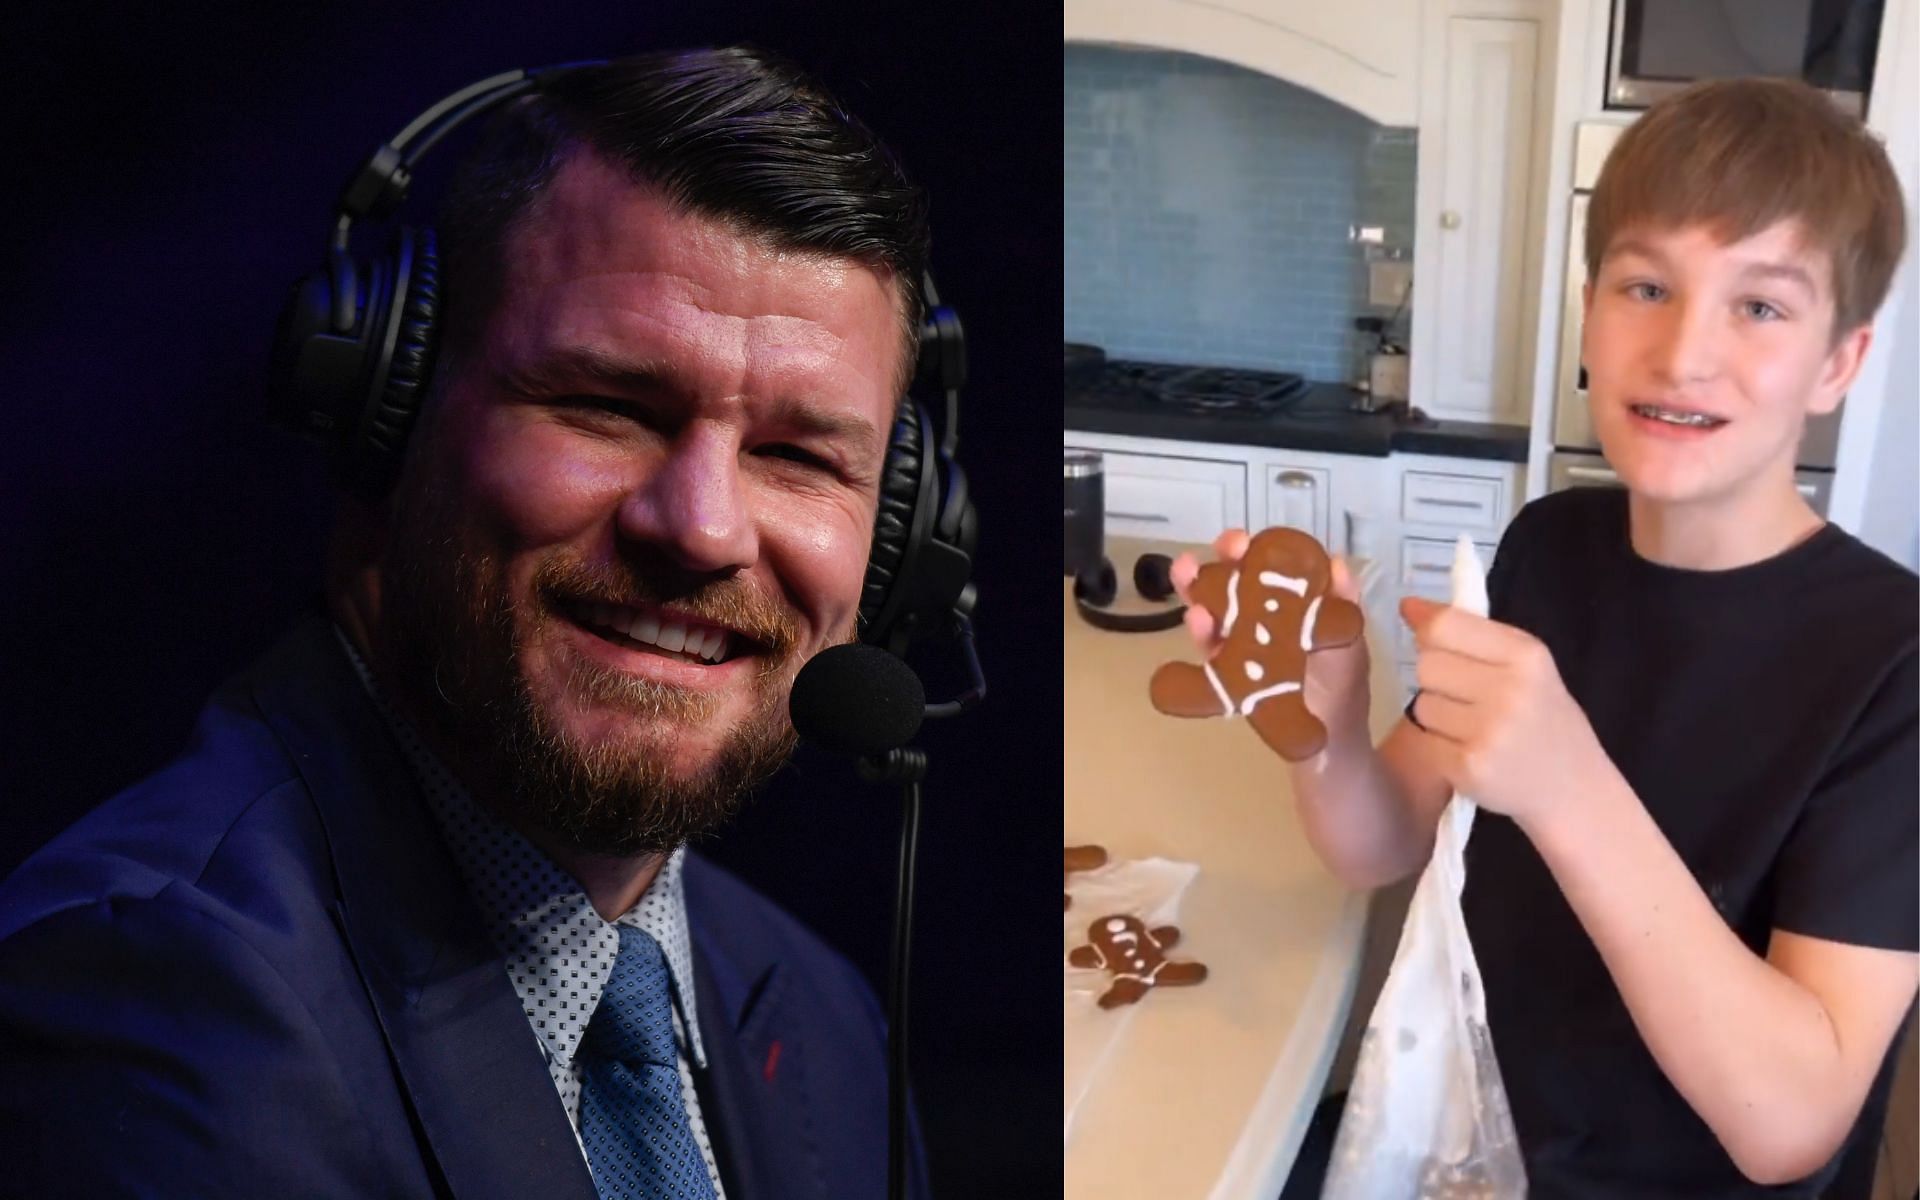 Michael Bisping (left) and his son (right). [Images courtesy: left image from Getty Images and right image from Twitter @bisping]